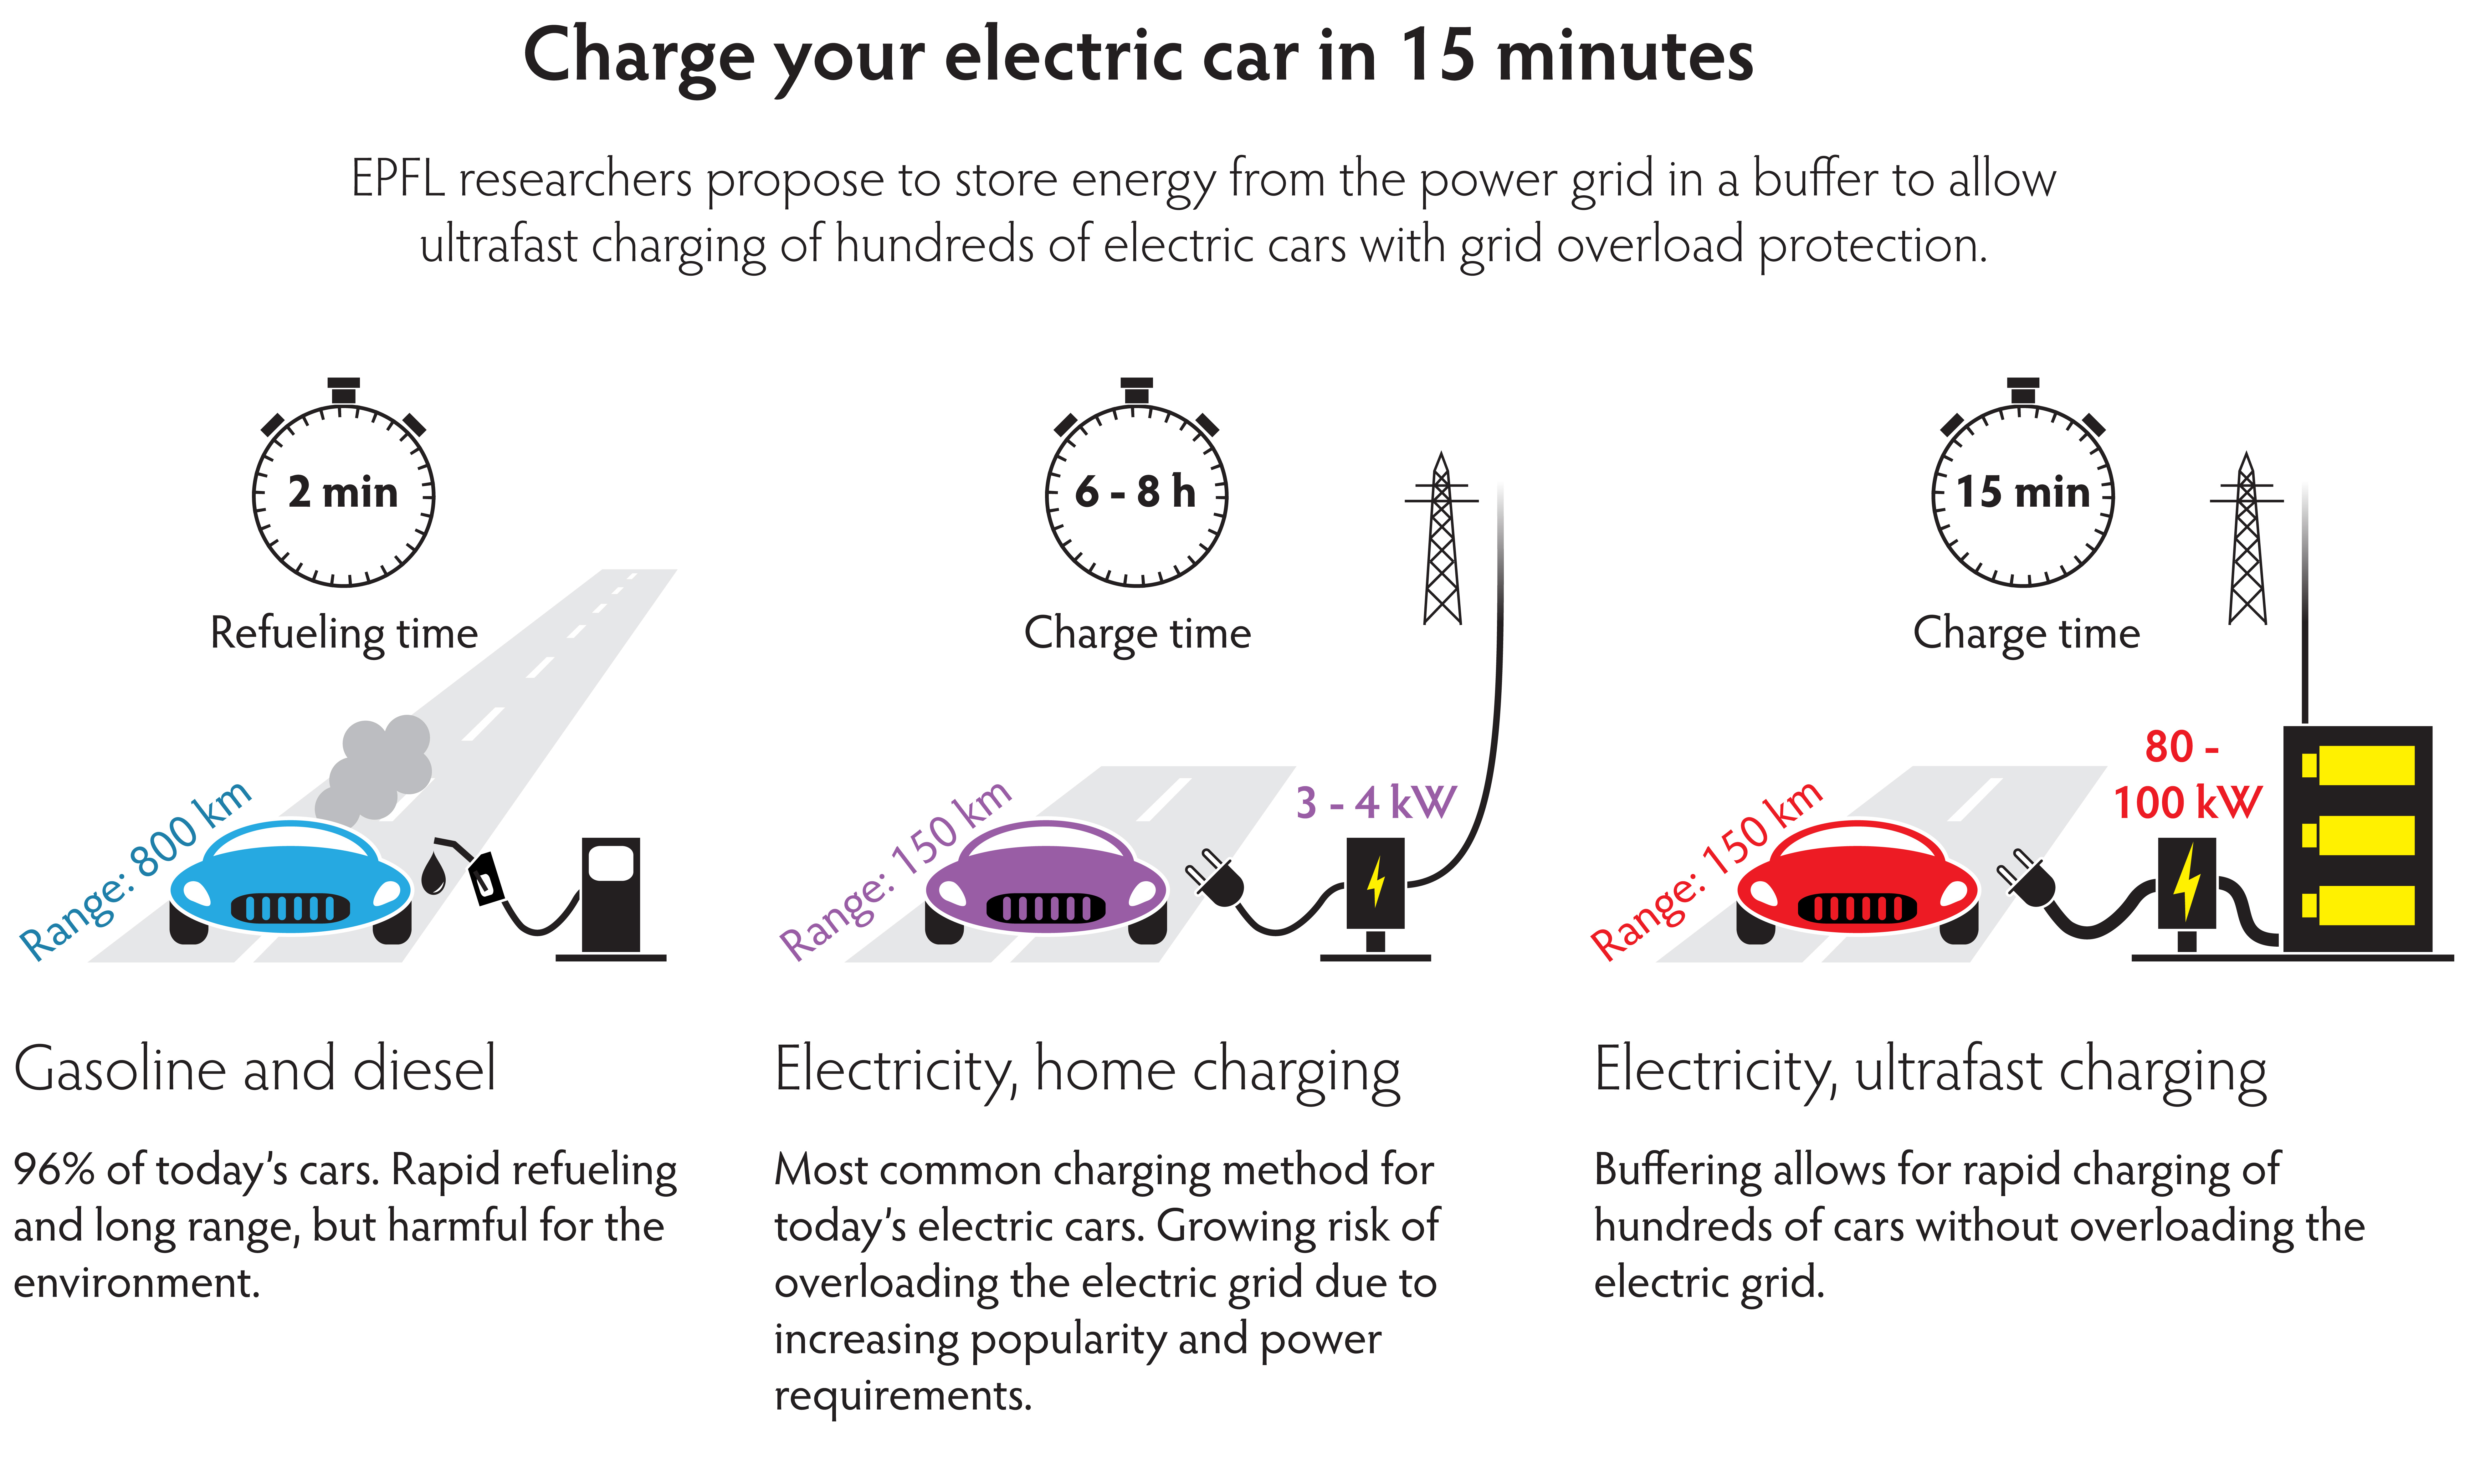 Charging an electric car as fast as filling a tank of gas EPFL